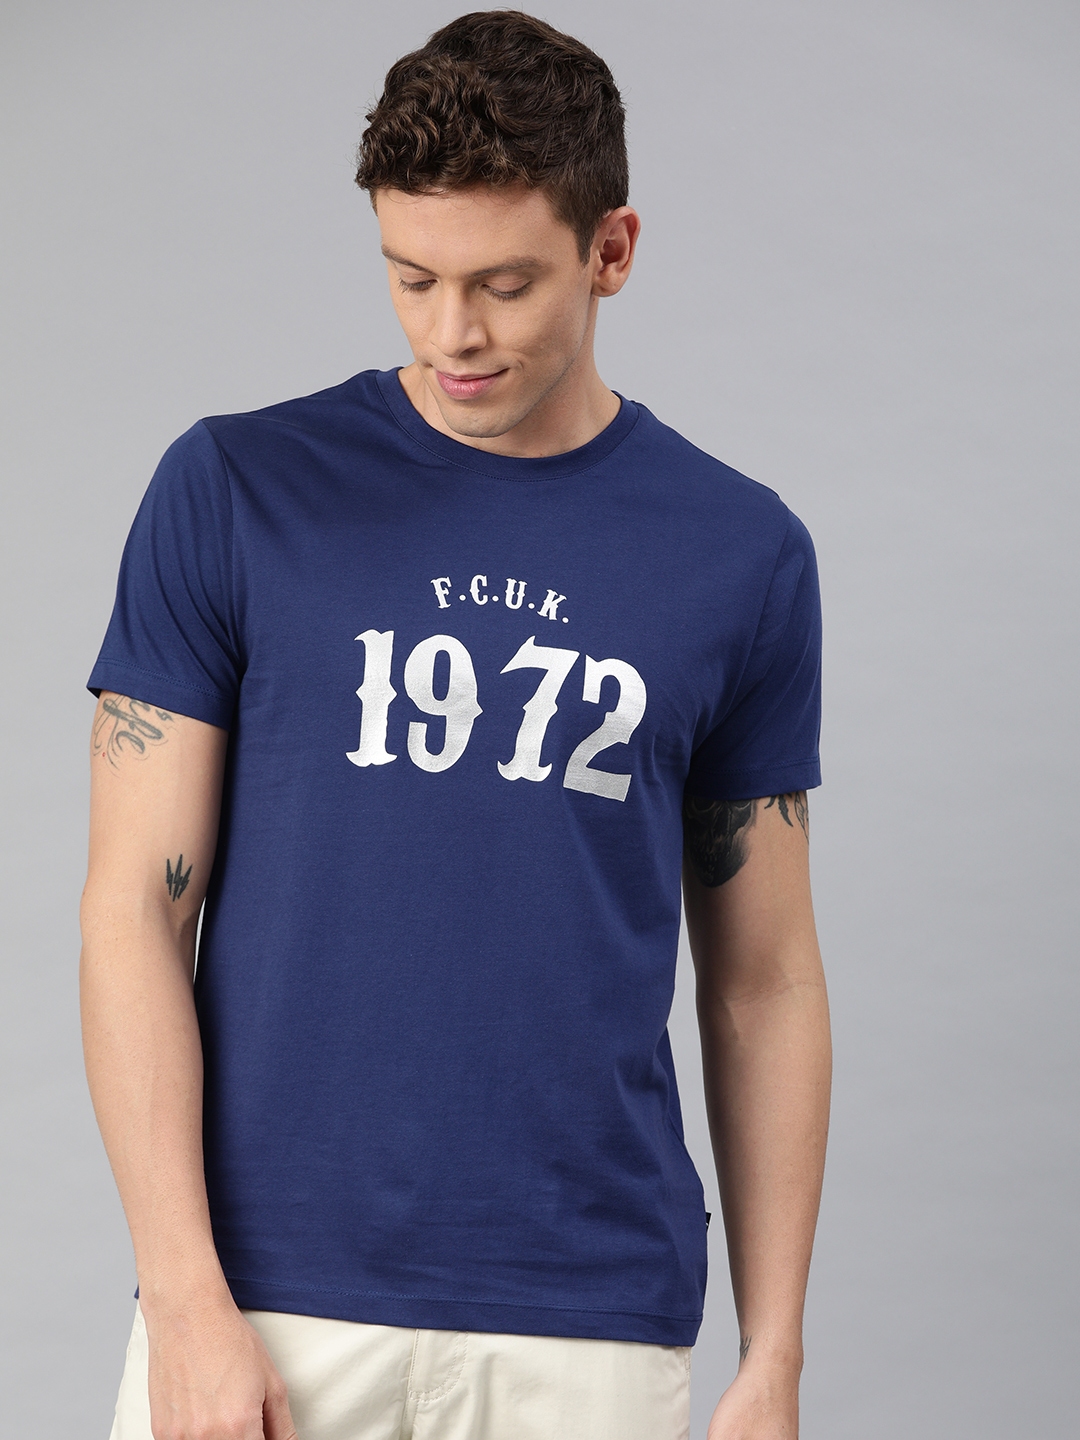 Buy French Connection Men Navy Blue Printed Round Neck T Shirt ...